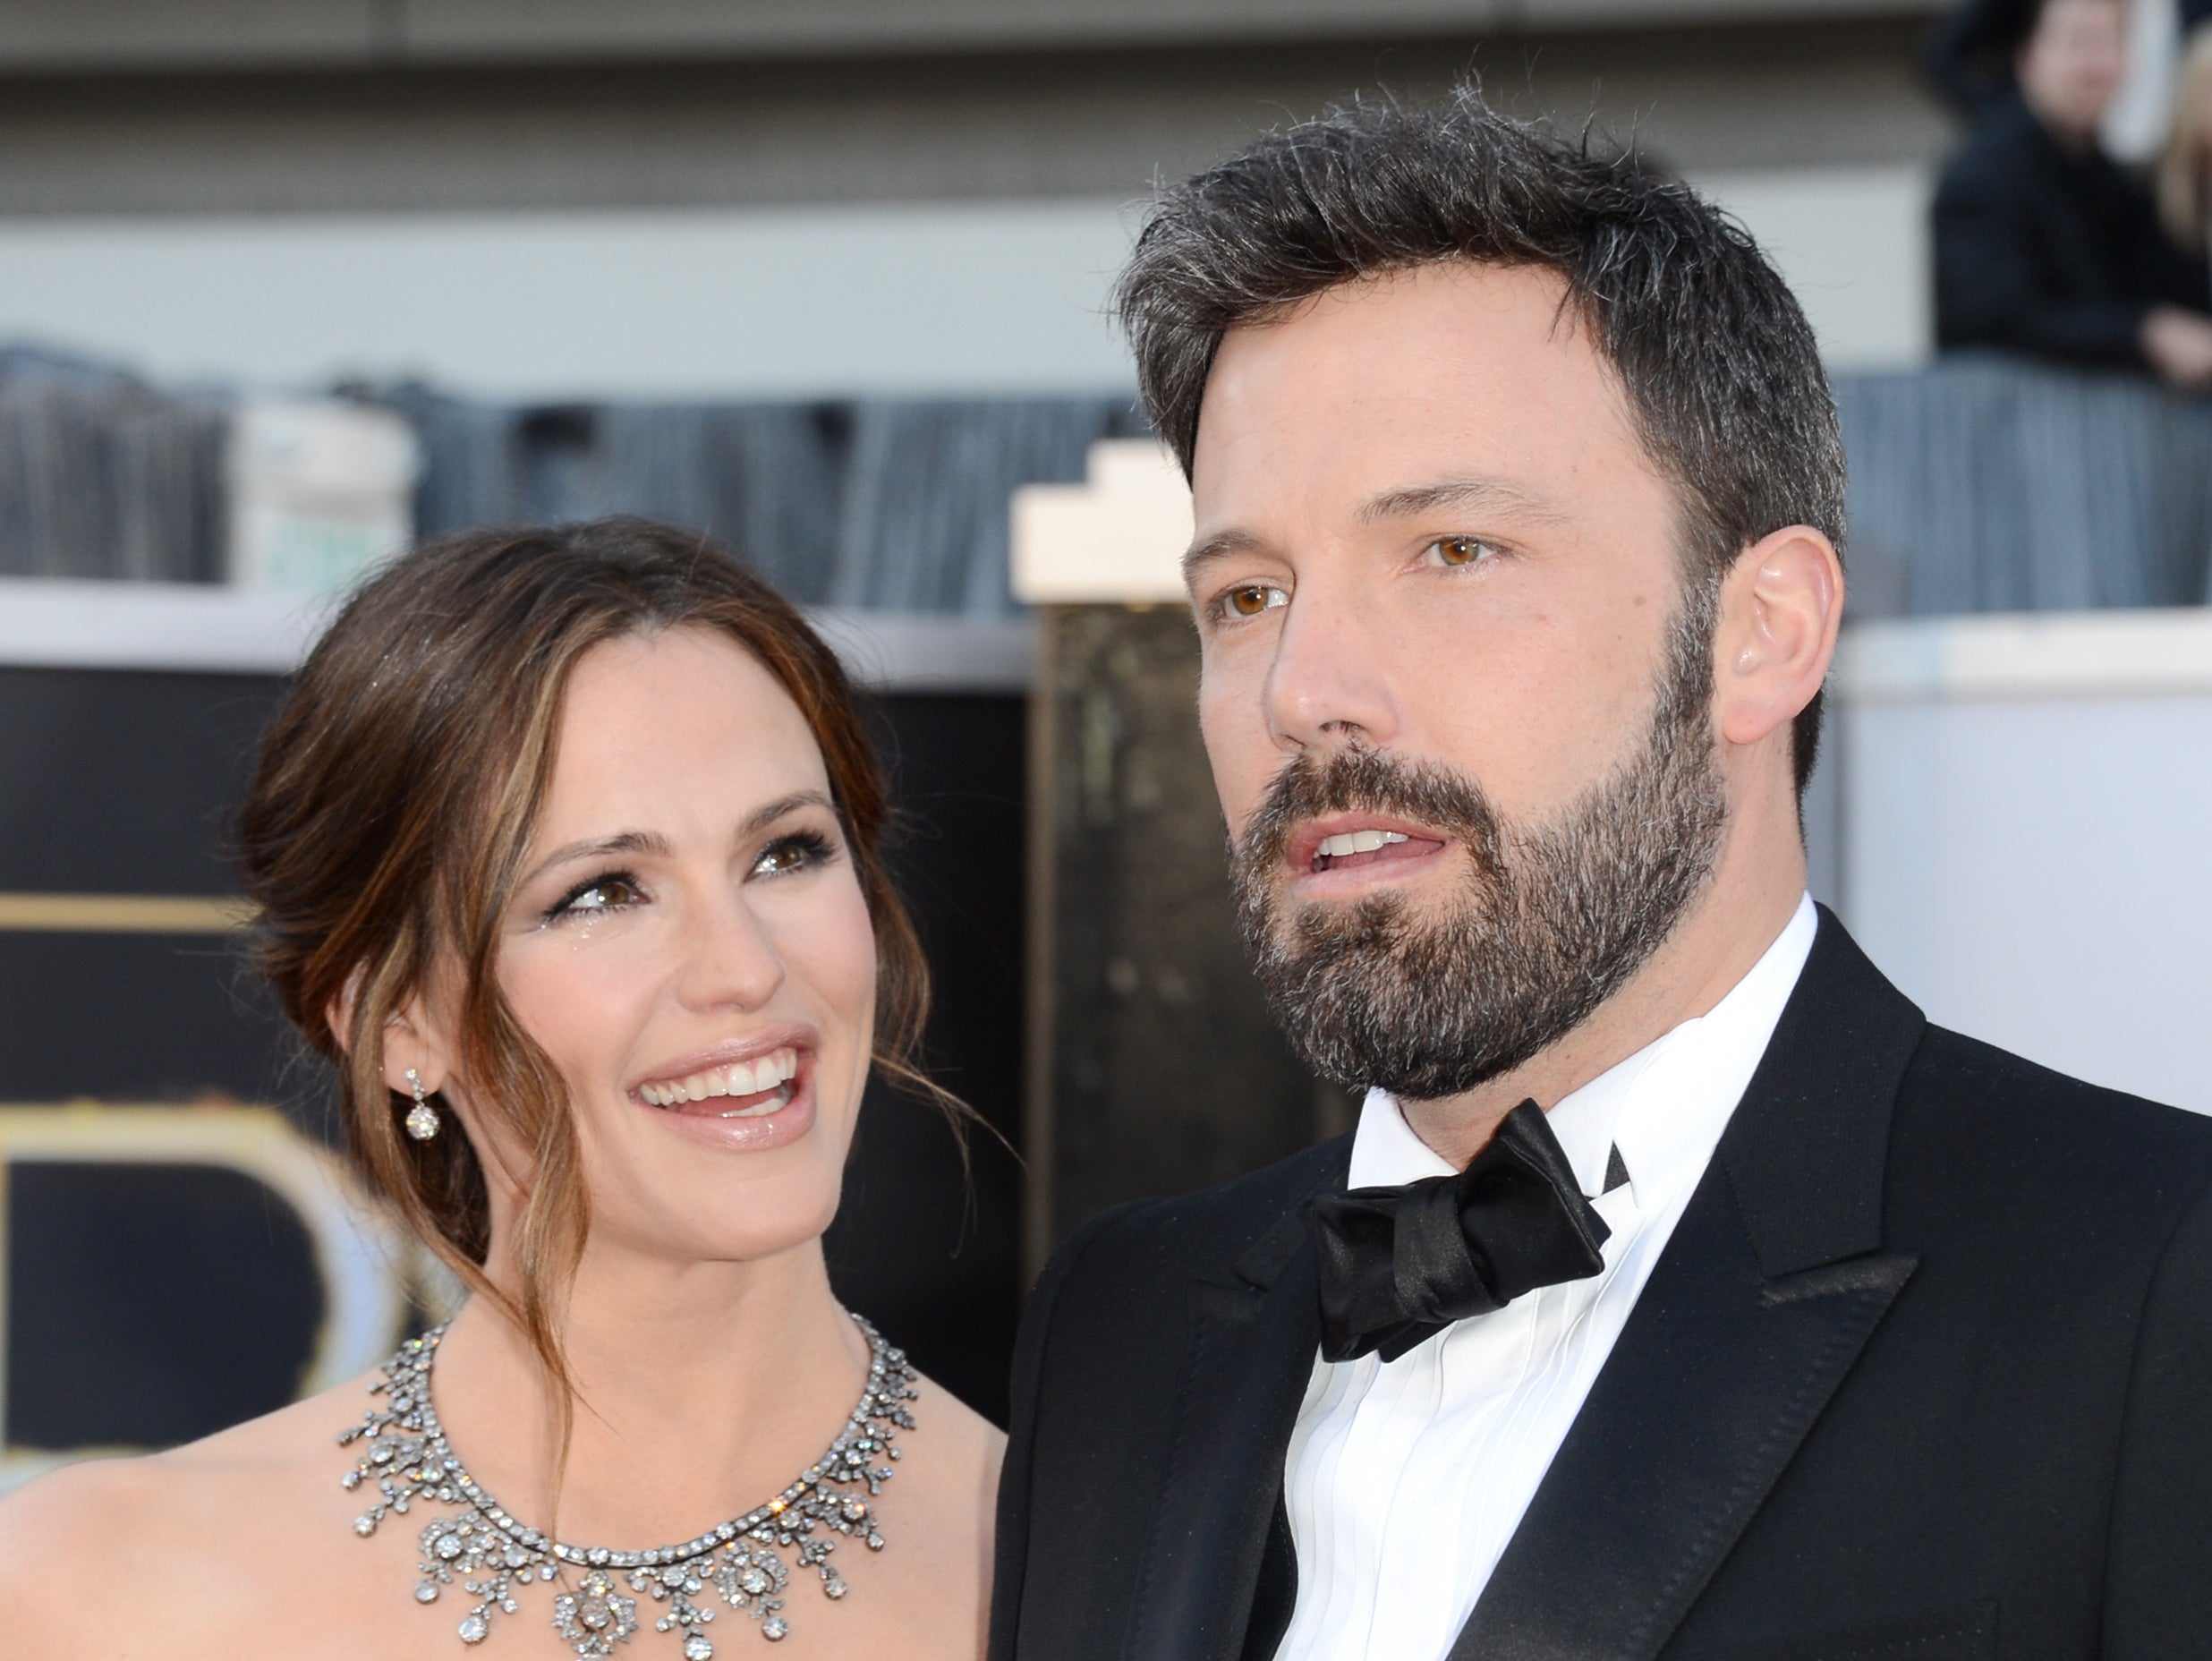 Ben Affleck agreed that the media took his recent comments ‘out of context’